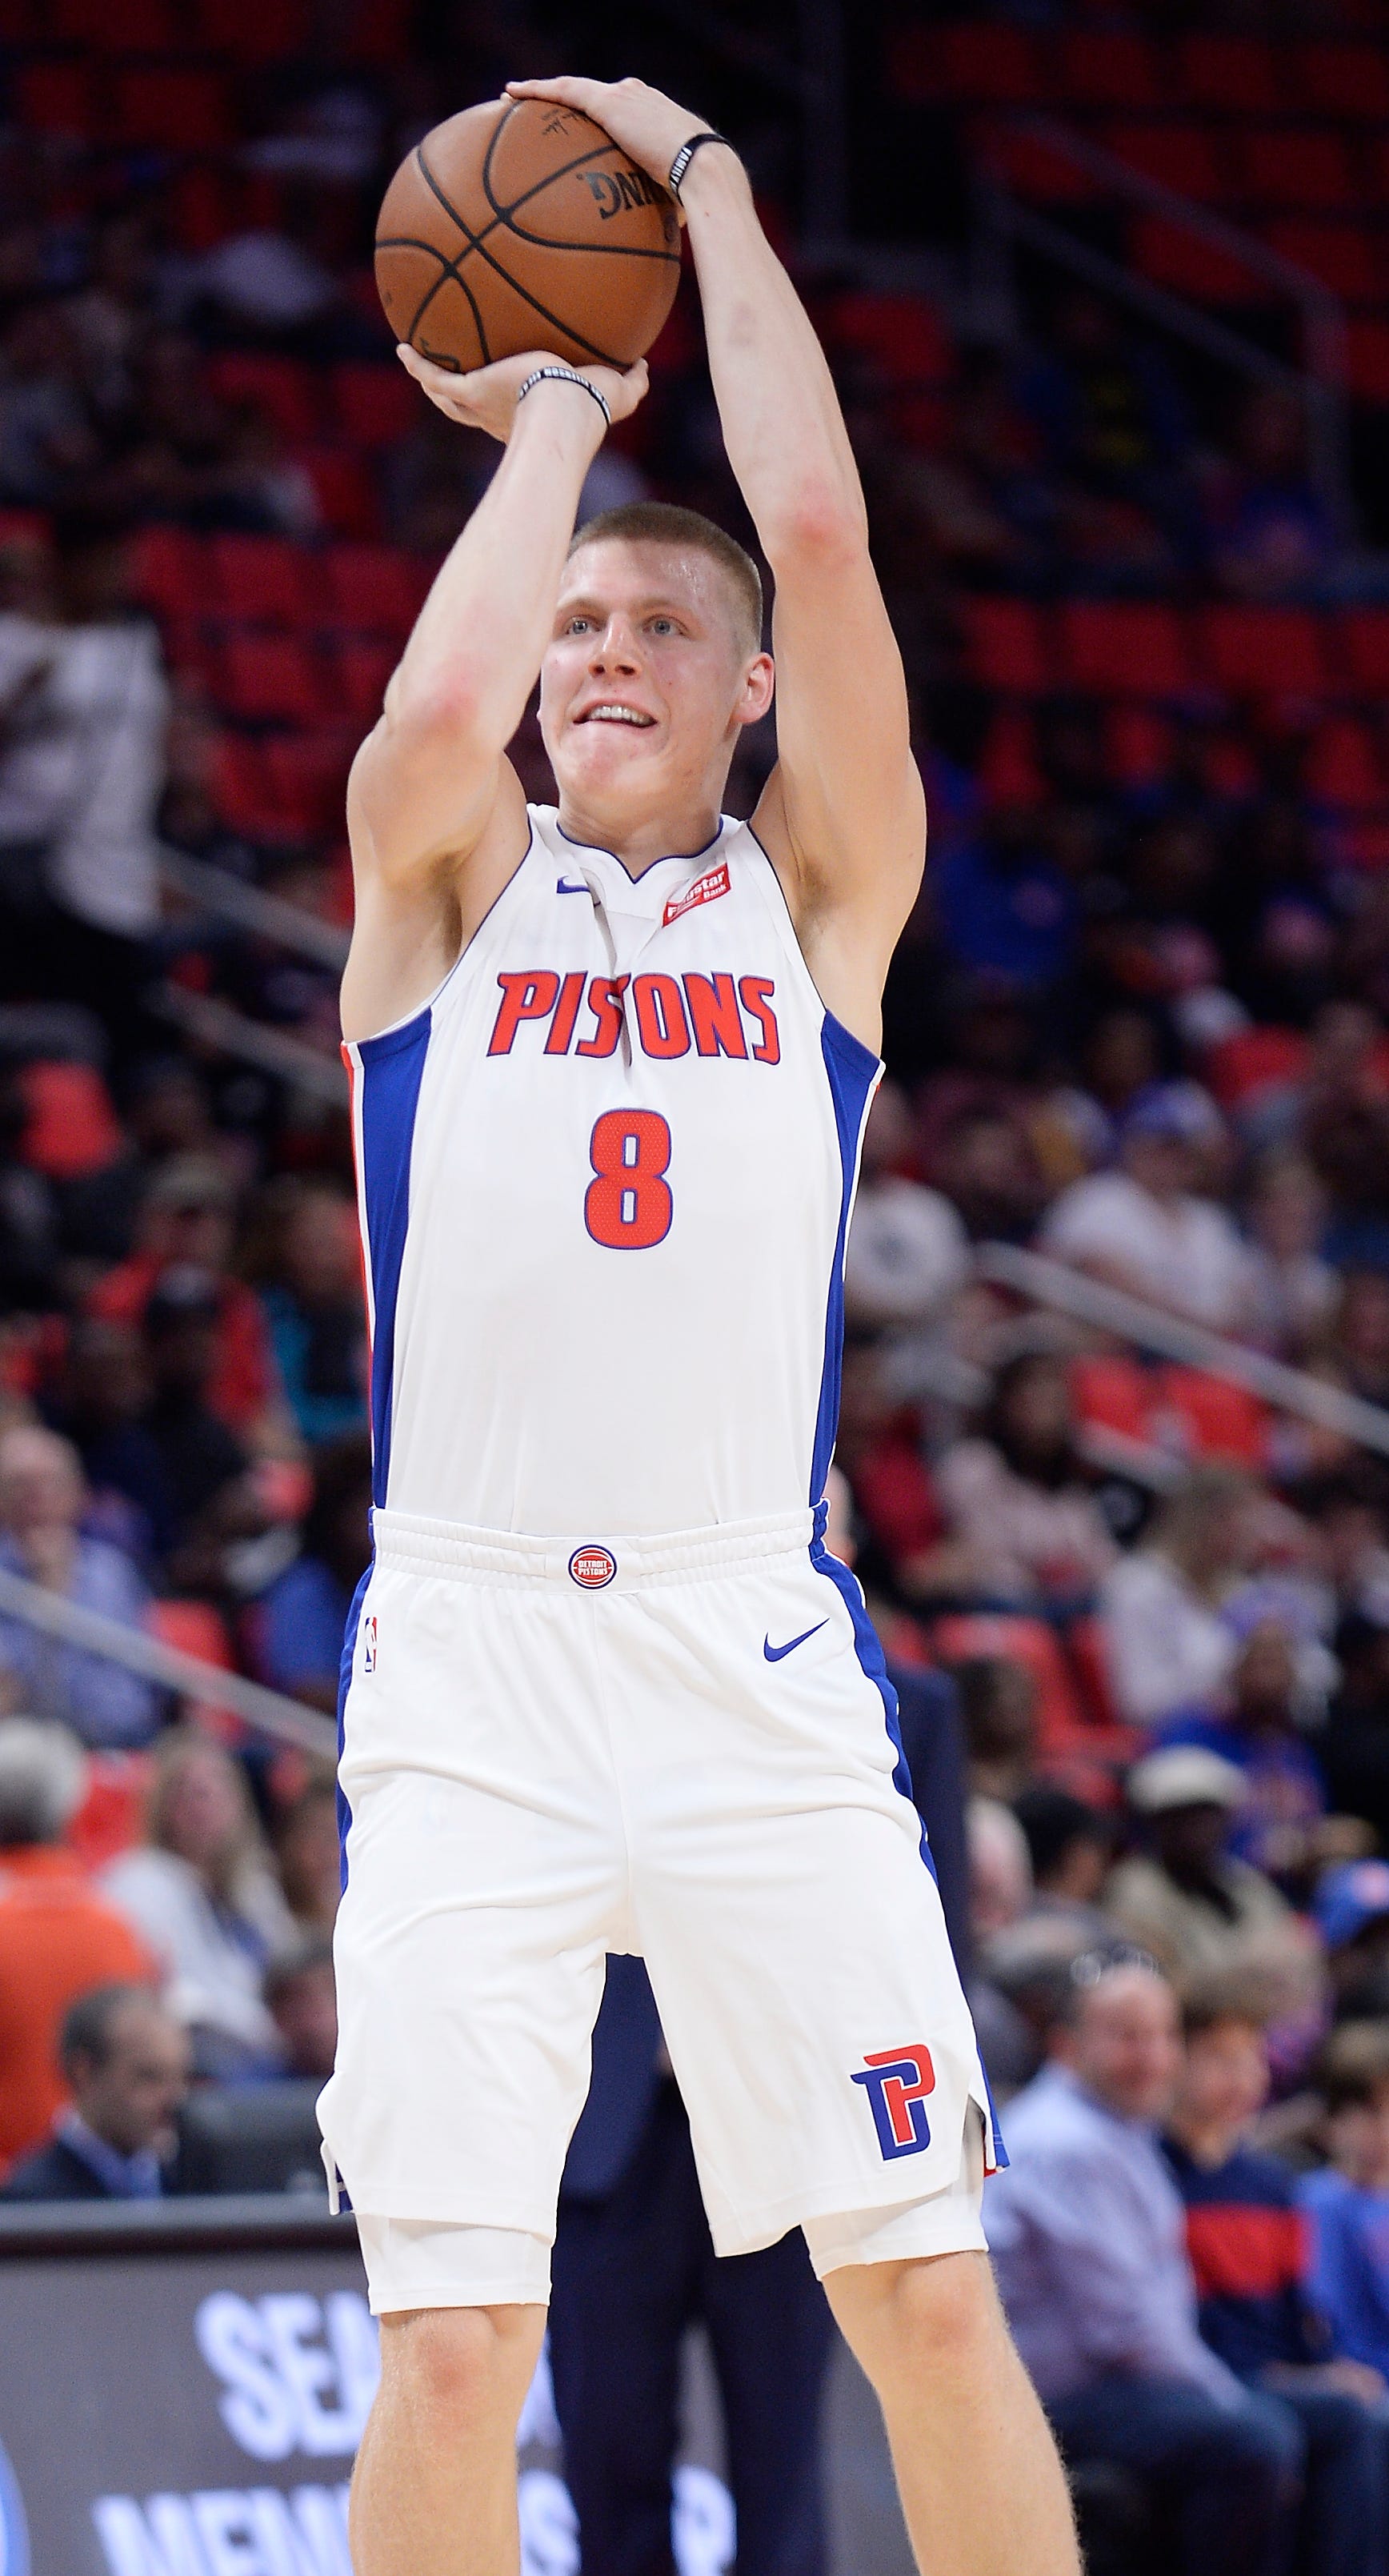 11. Henry Ellenson, F: In his first two seasons, Ellenson played sparingly, which shows a smaller value. If he can get regular playing time and take advantage of mismatches, he can become more of a fixture and potentially move ahead of Jon Leuer on the depth chart. It’s a big season for Ellenson to establish his value — or he could become trade bait.